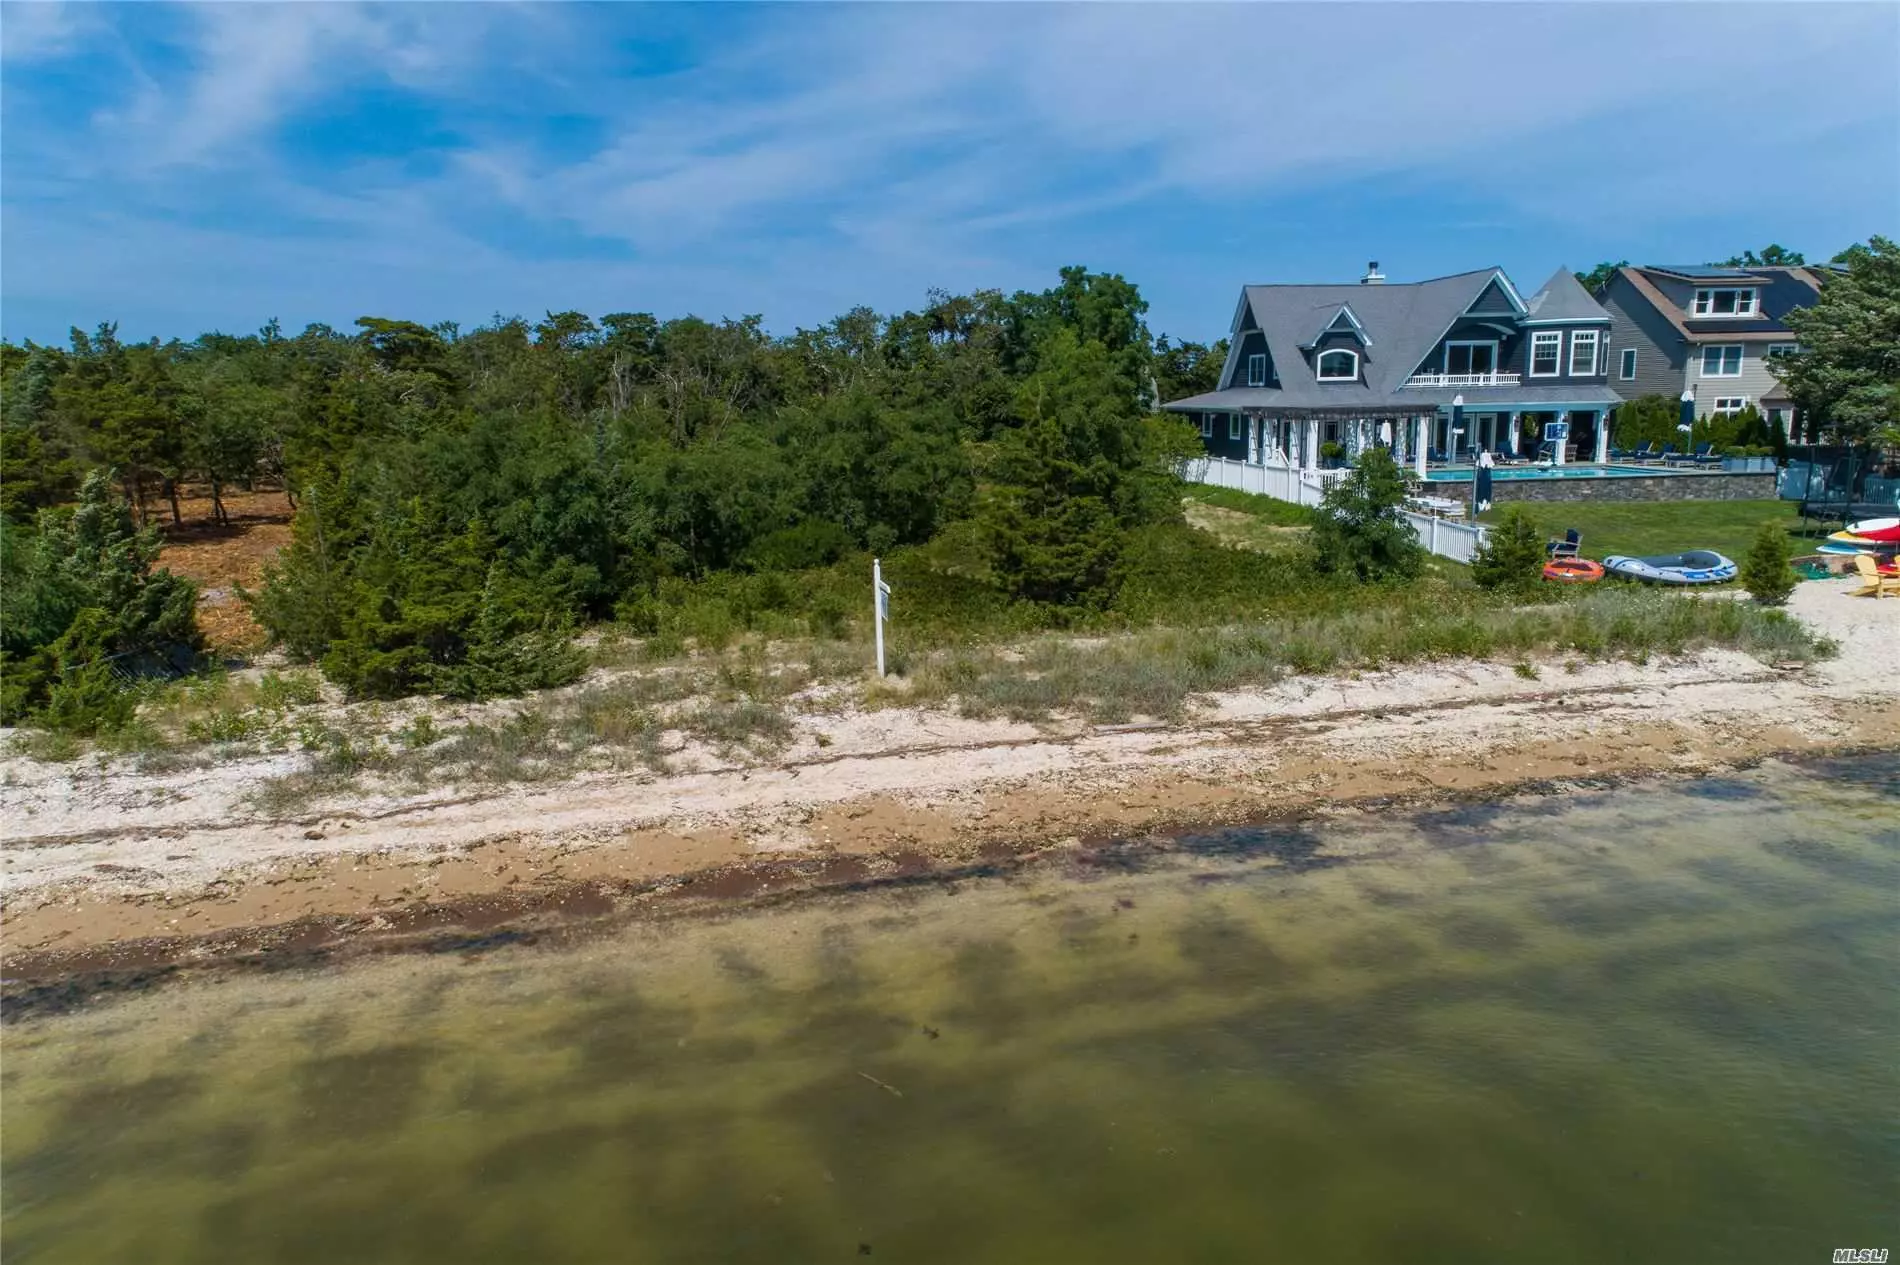 Build your Dream Home.One of the Most Beautiful Beaches on The North shore. The Hampton Life is Right Here. Waterfront Parcel One Acre. Gorgeous Beach Front, Mooring and Beach.Quiet and Peaceful Quintessential Beach Life in Asharoken . Private Village and Police. Enjoy the Ambiance of Northport Village. Plans are Available Upon Request. SD#4